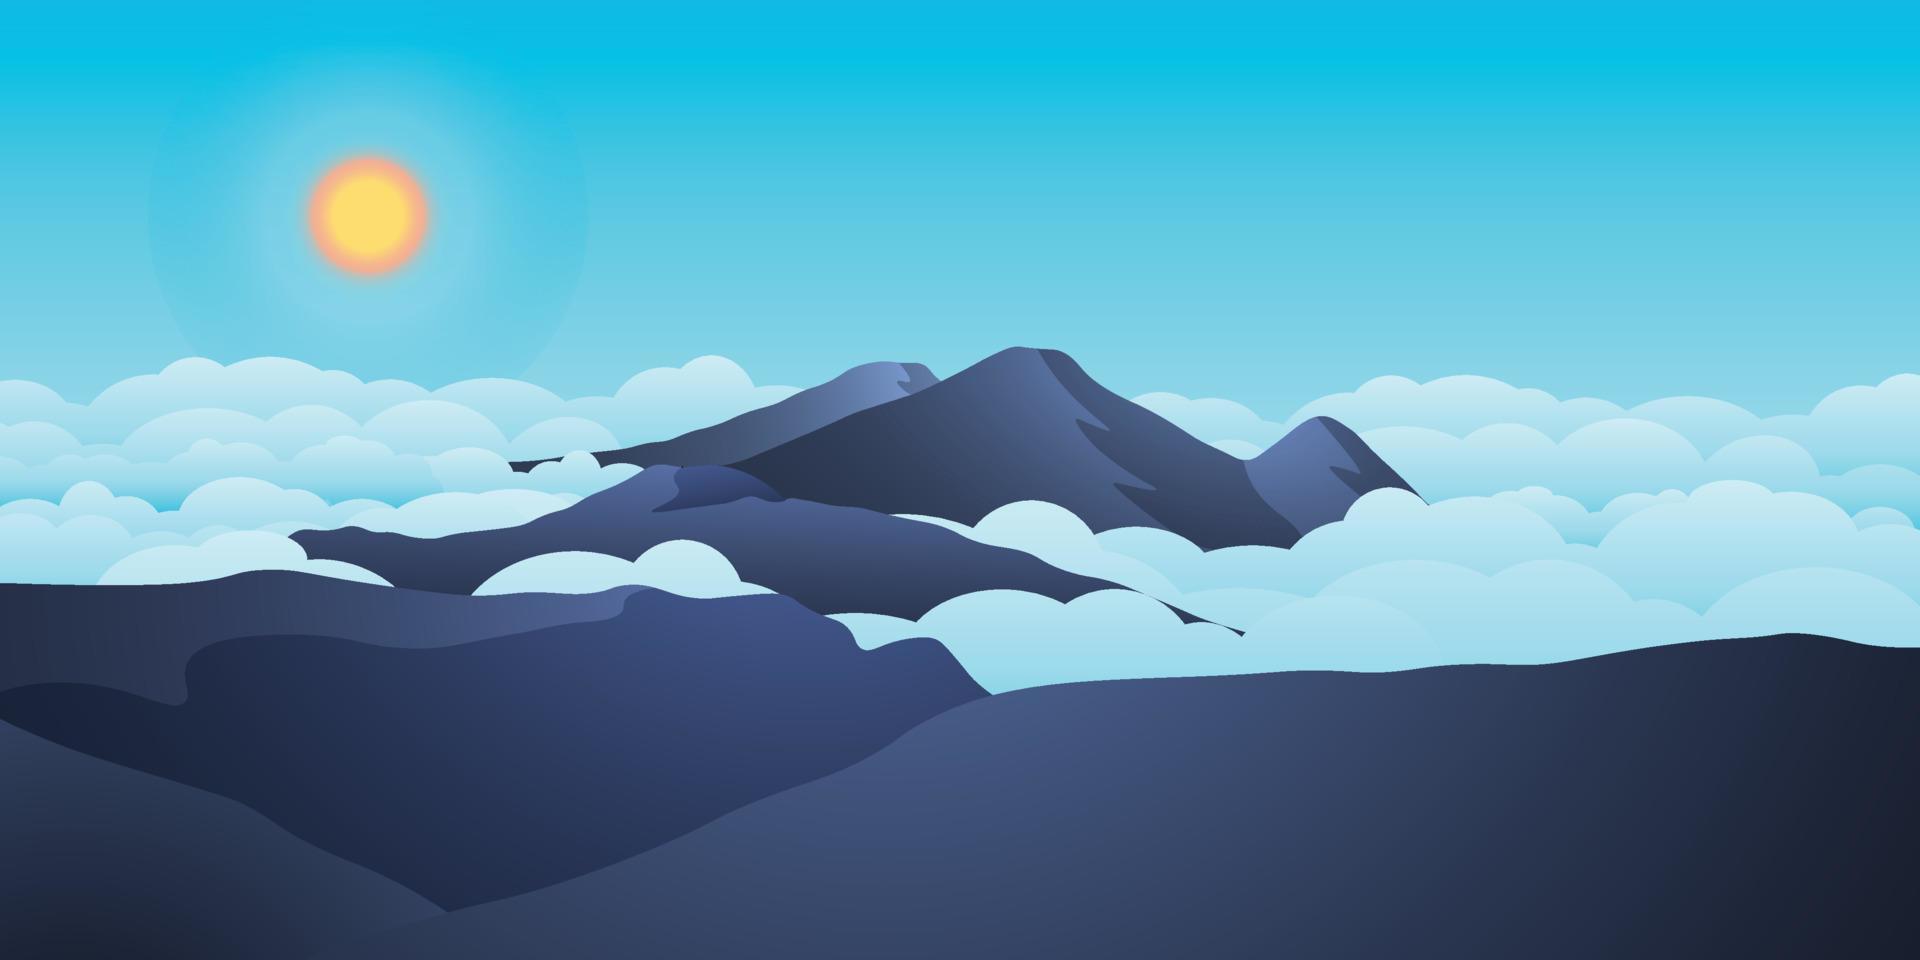 peaceful beautiful midday over prau mountains with ocean of clouds, Use as landscape background or wallpaper. vector